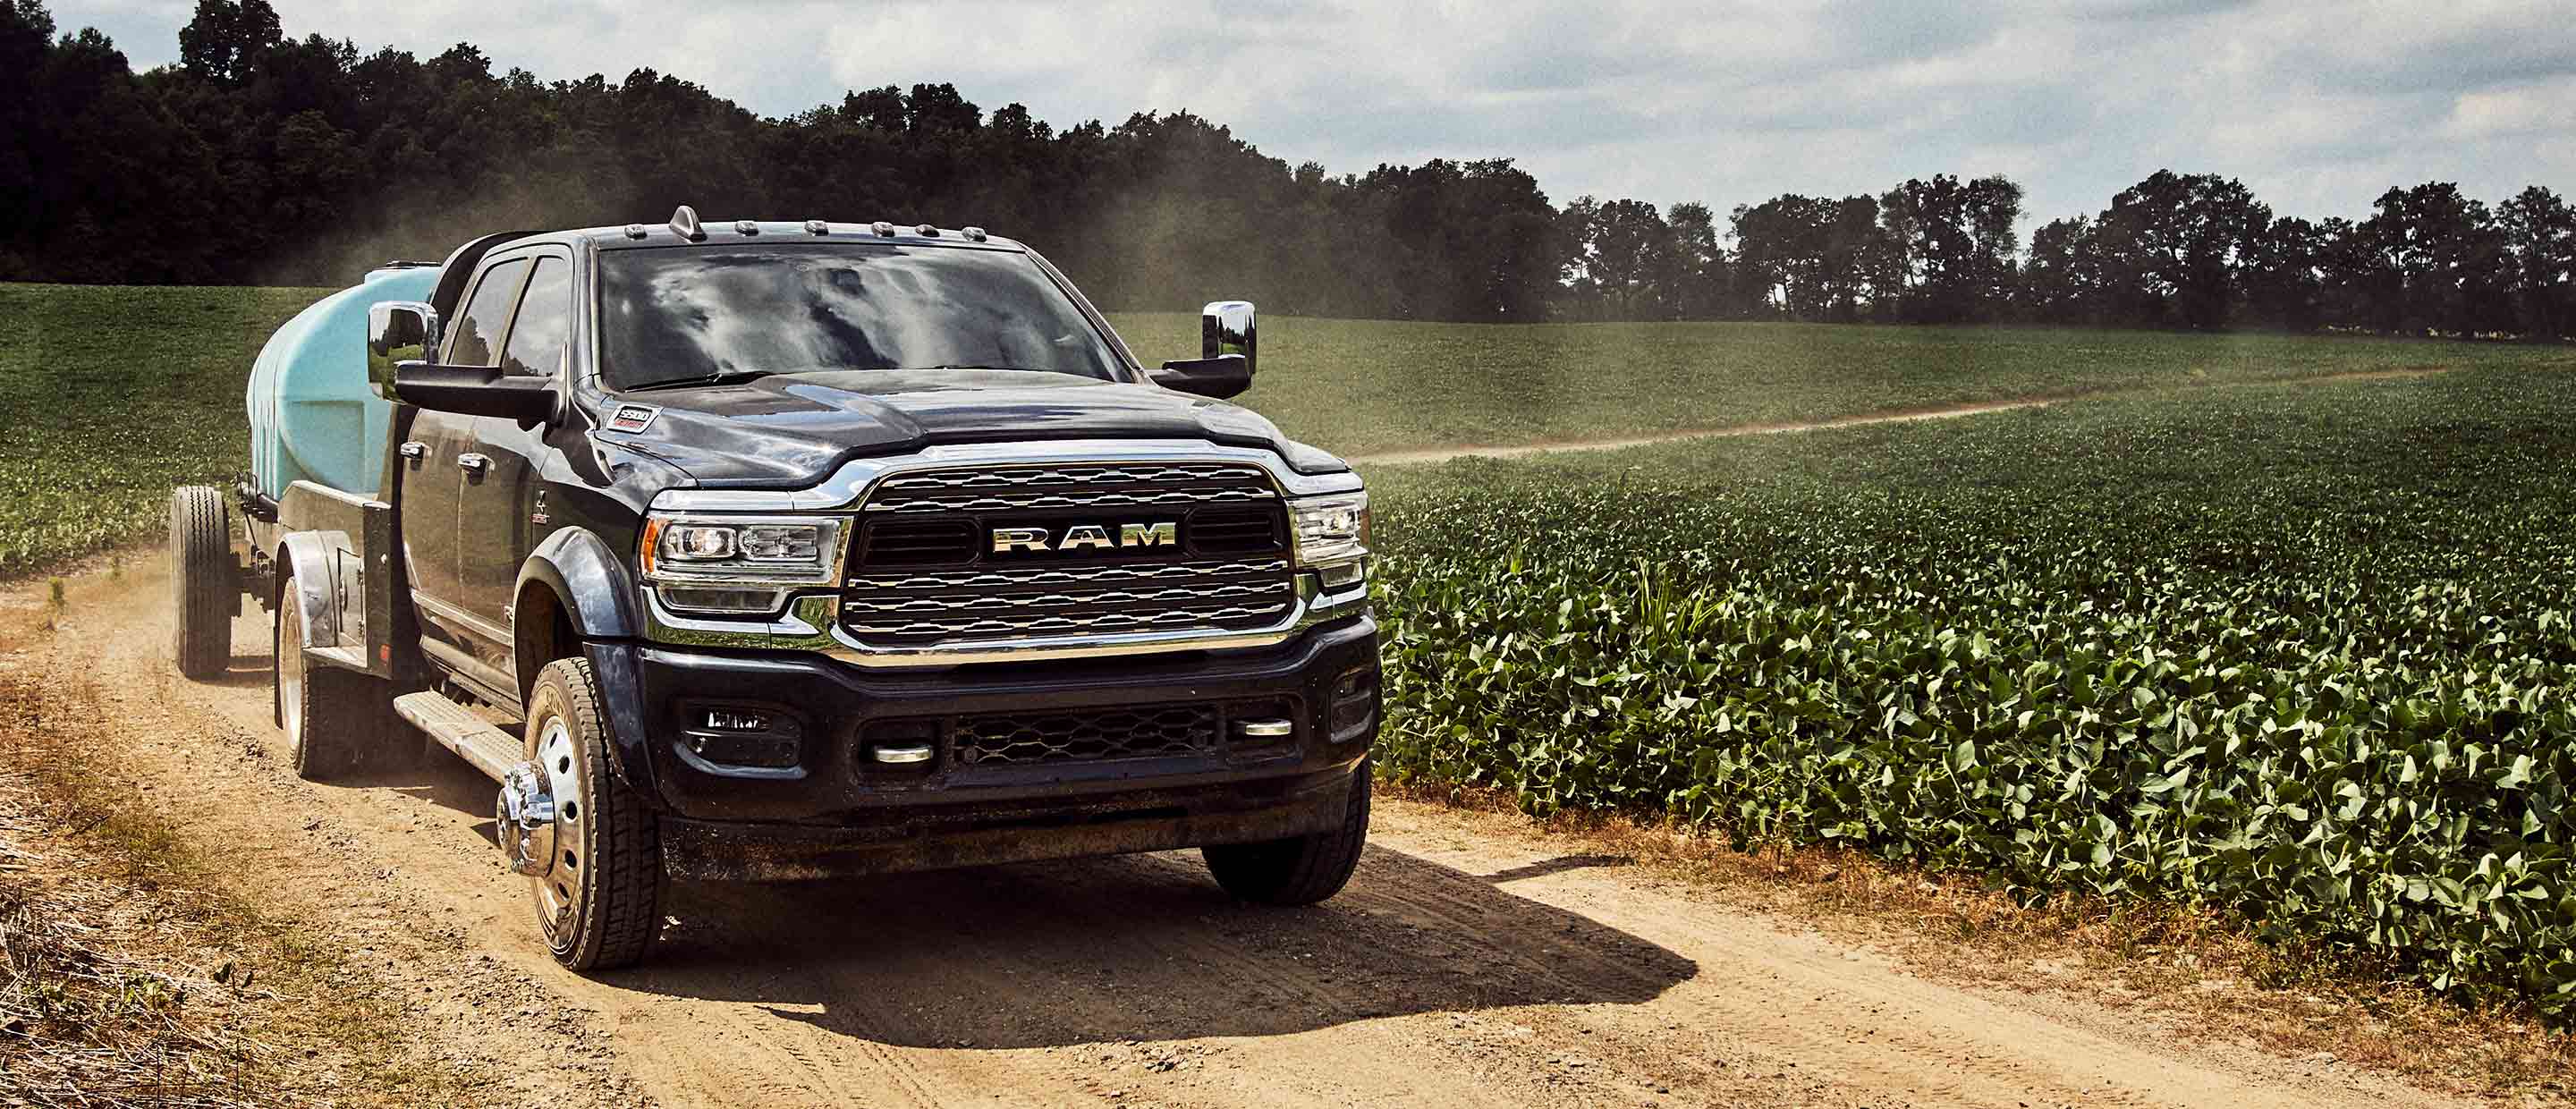 The 2022 Ram Chassis Cab carrying an irrigation tank, being driven on a dirt road.